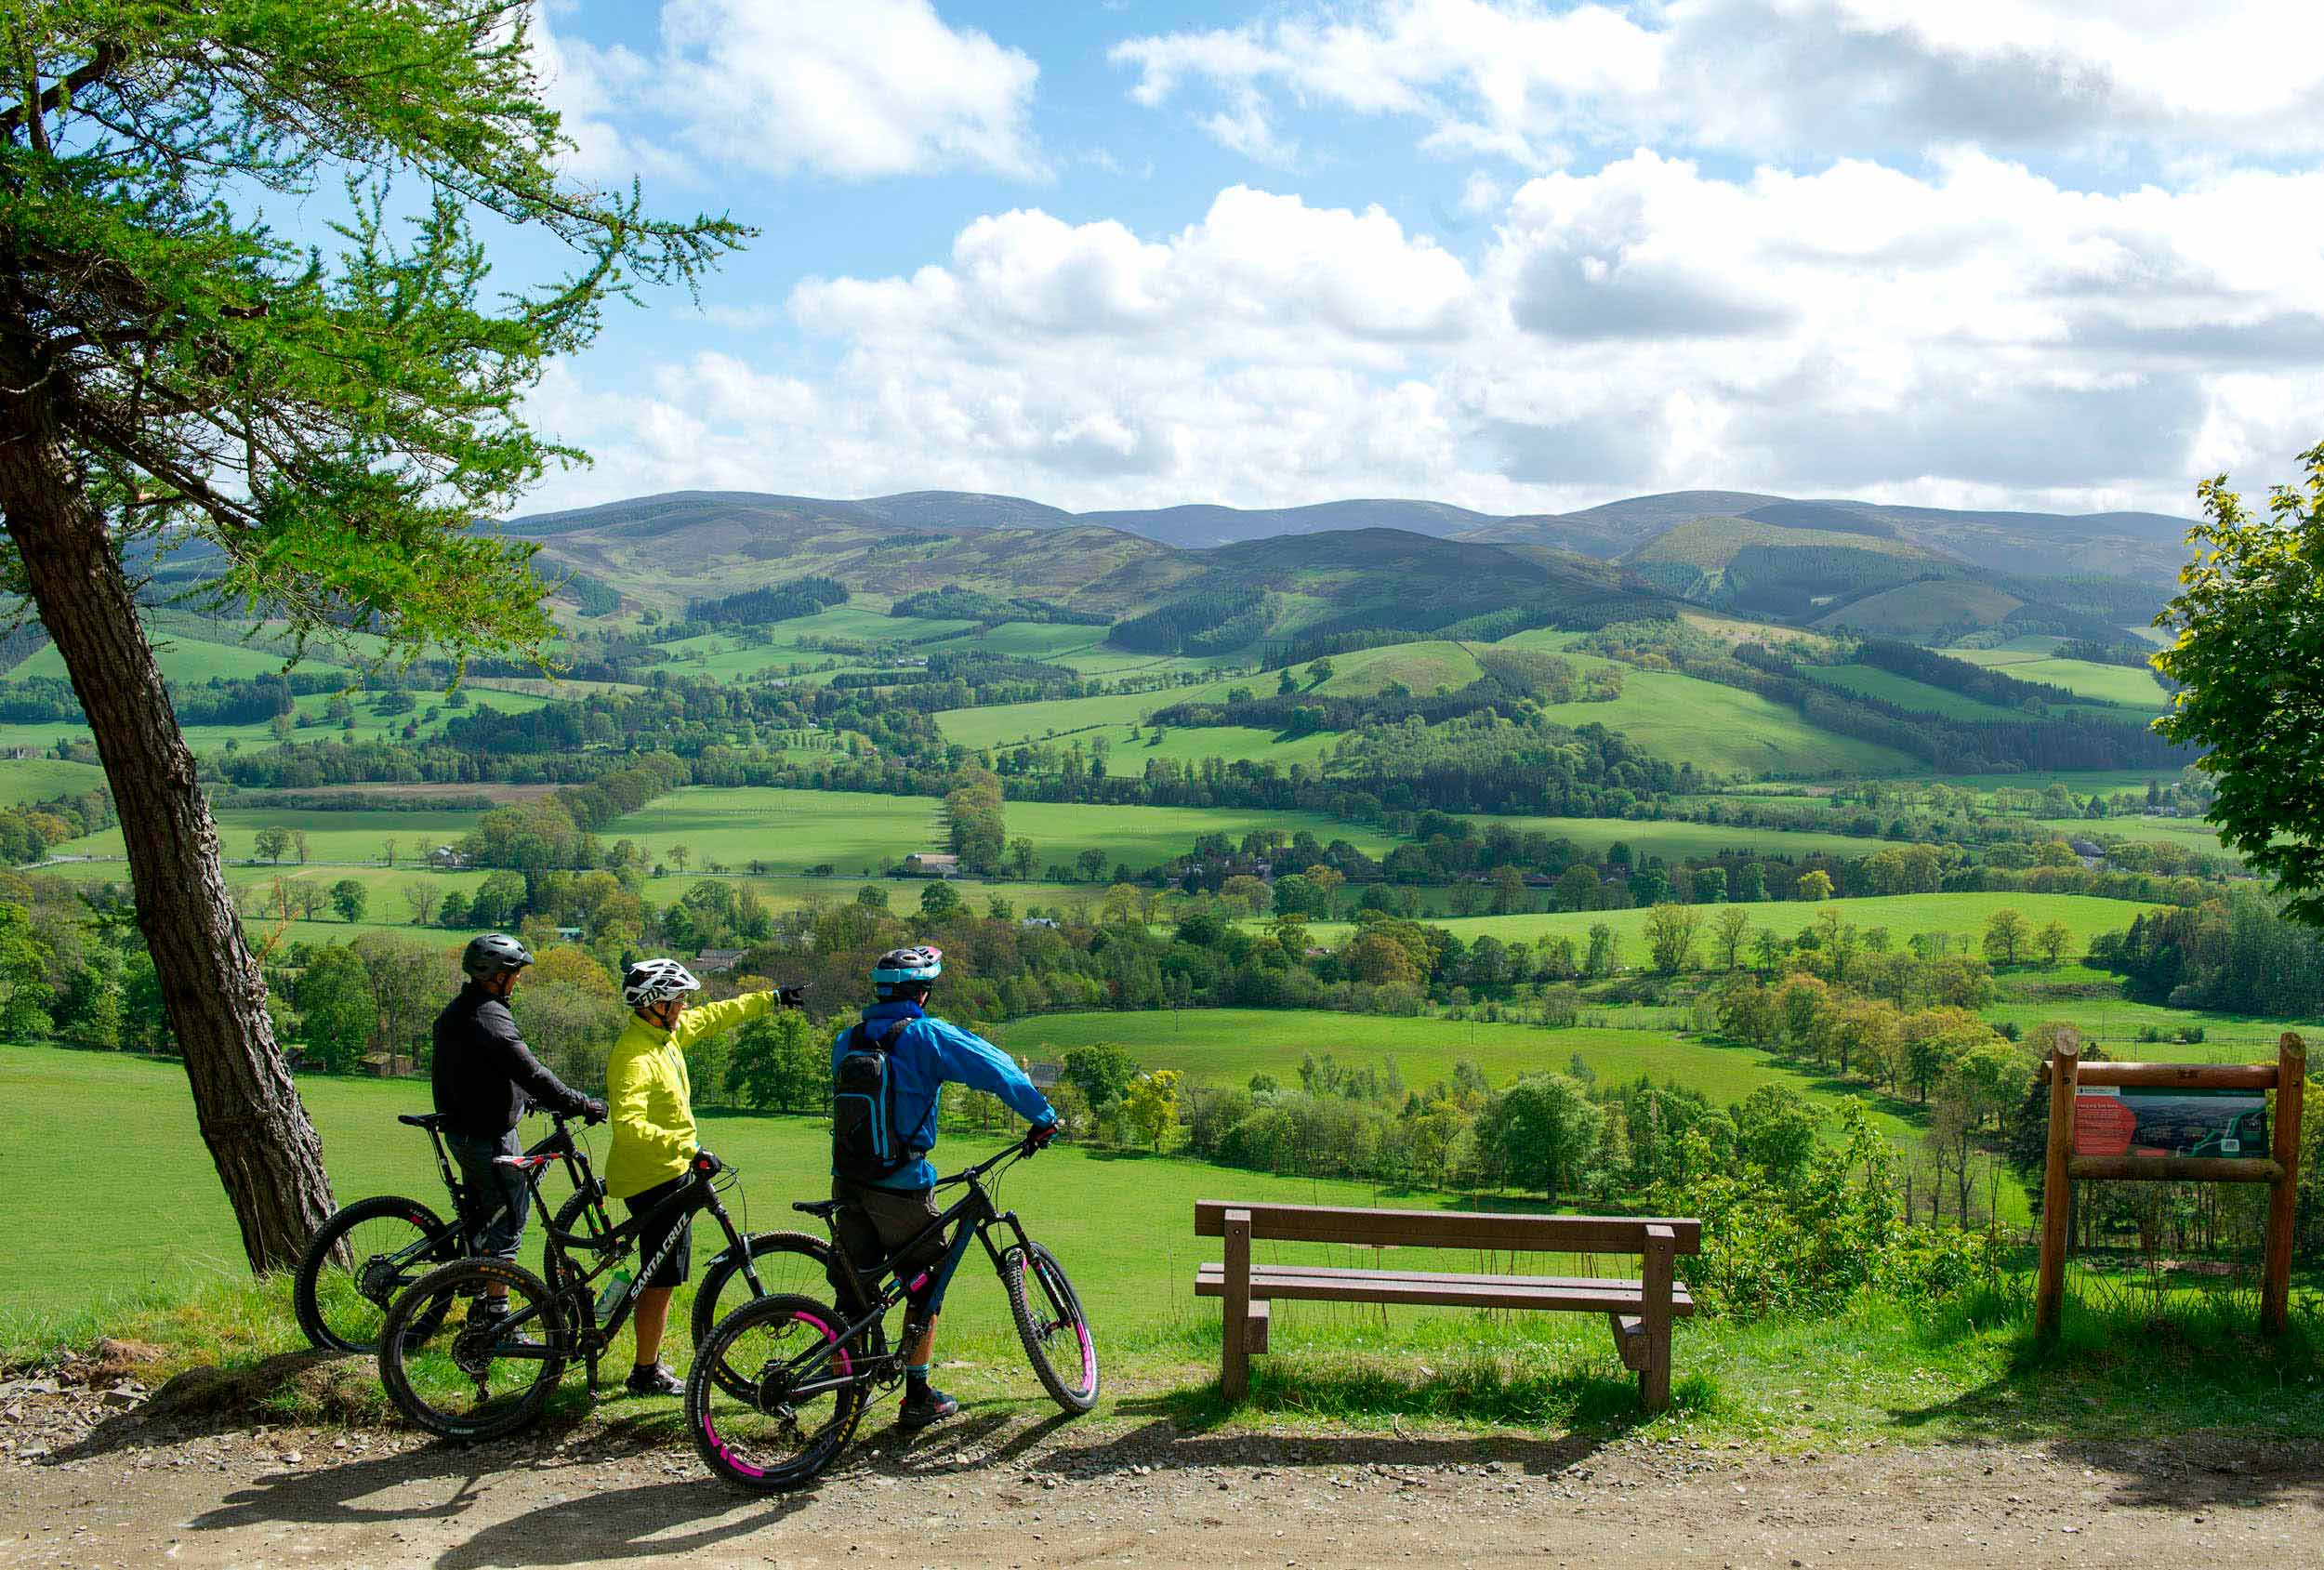 Scottish-Borders-visitscotland_29846837730---Cyclists-enjoy-the-view-over-the-Tweed-valley-from-Glentress-Forest-Peebles-Scottish-Borders-small.jpg